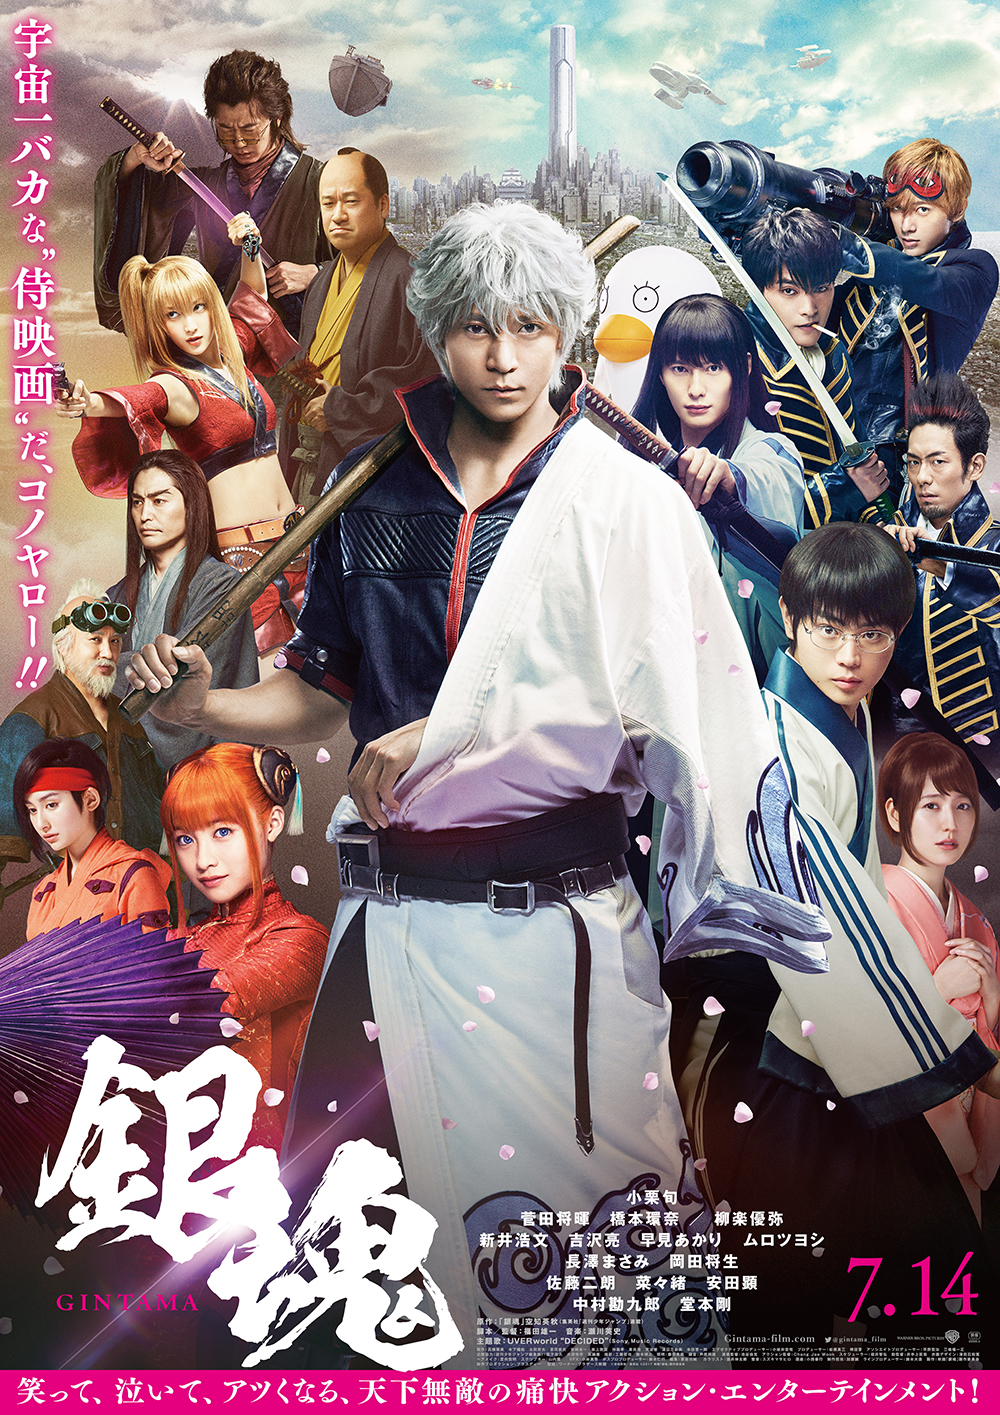 Gintama Live Action The Movie Main Poster